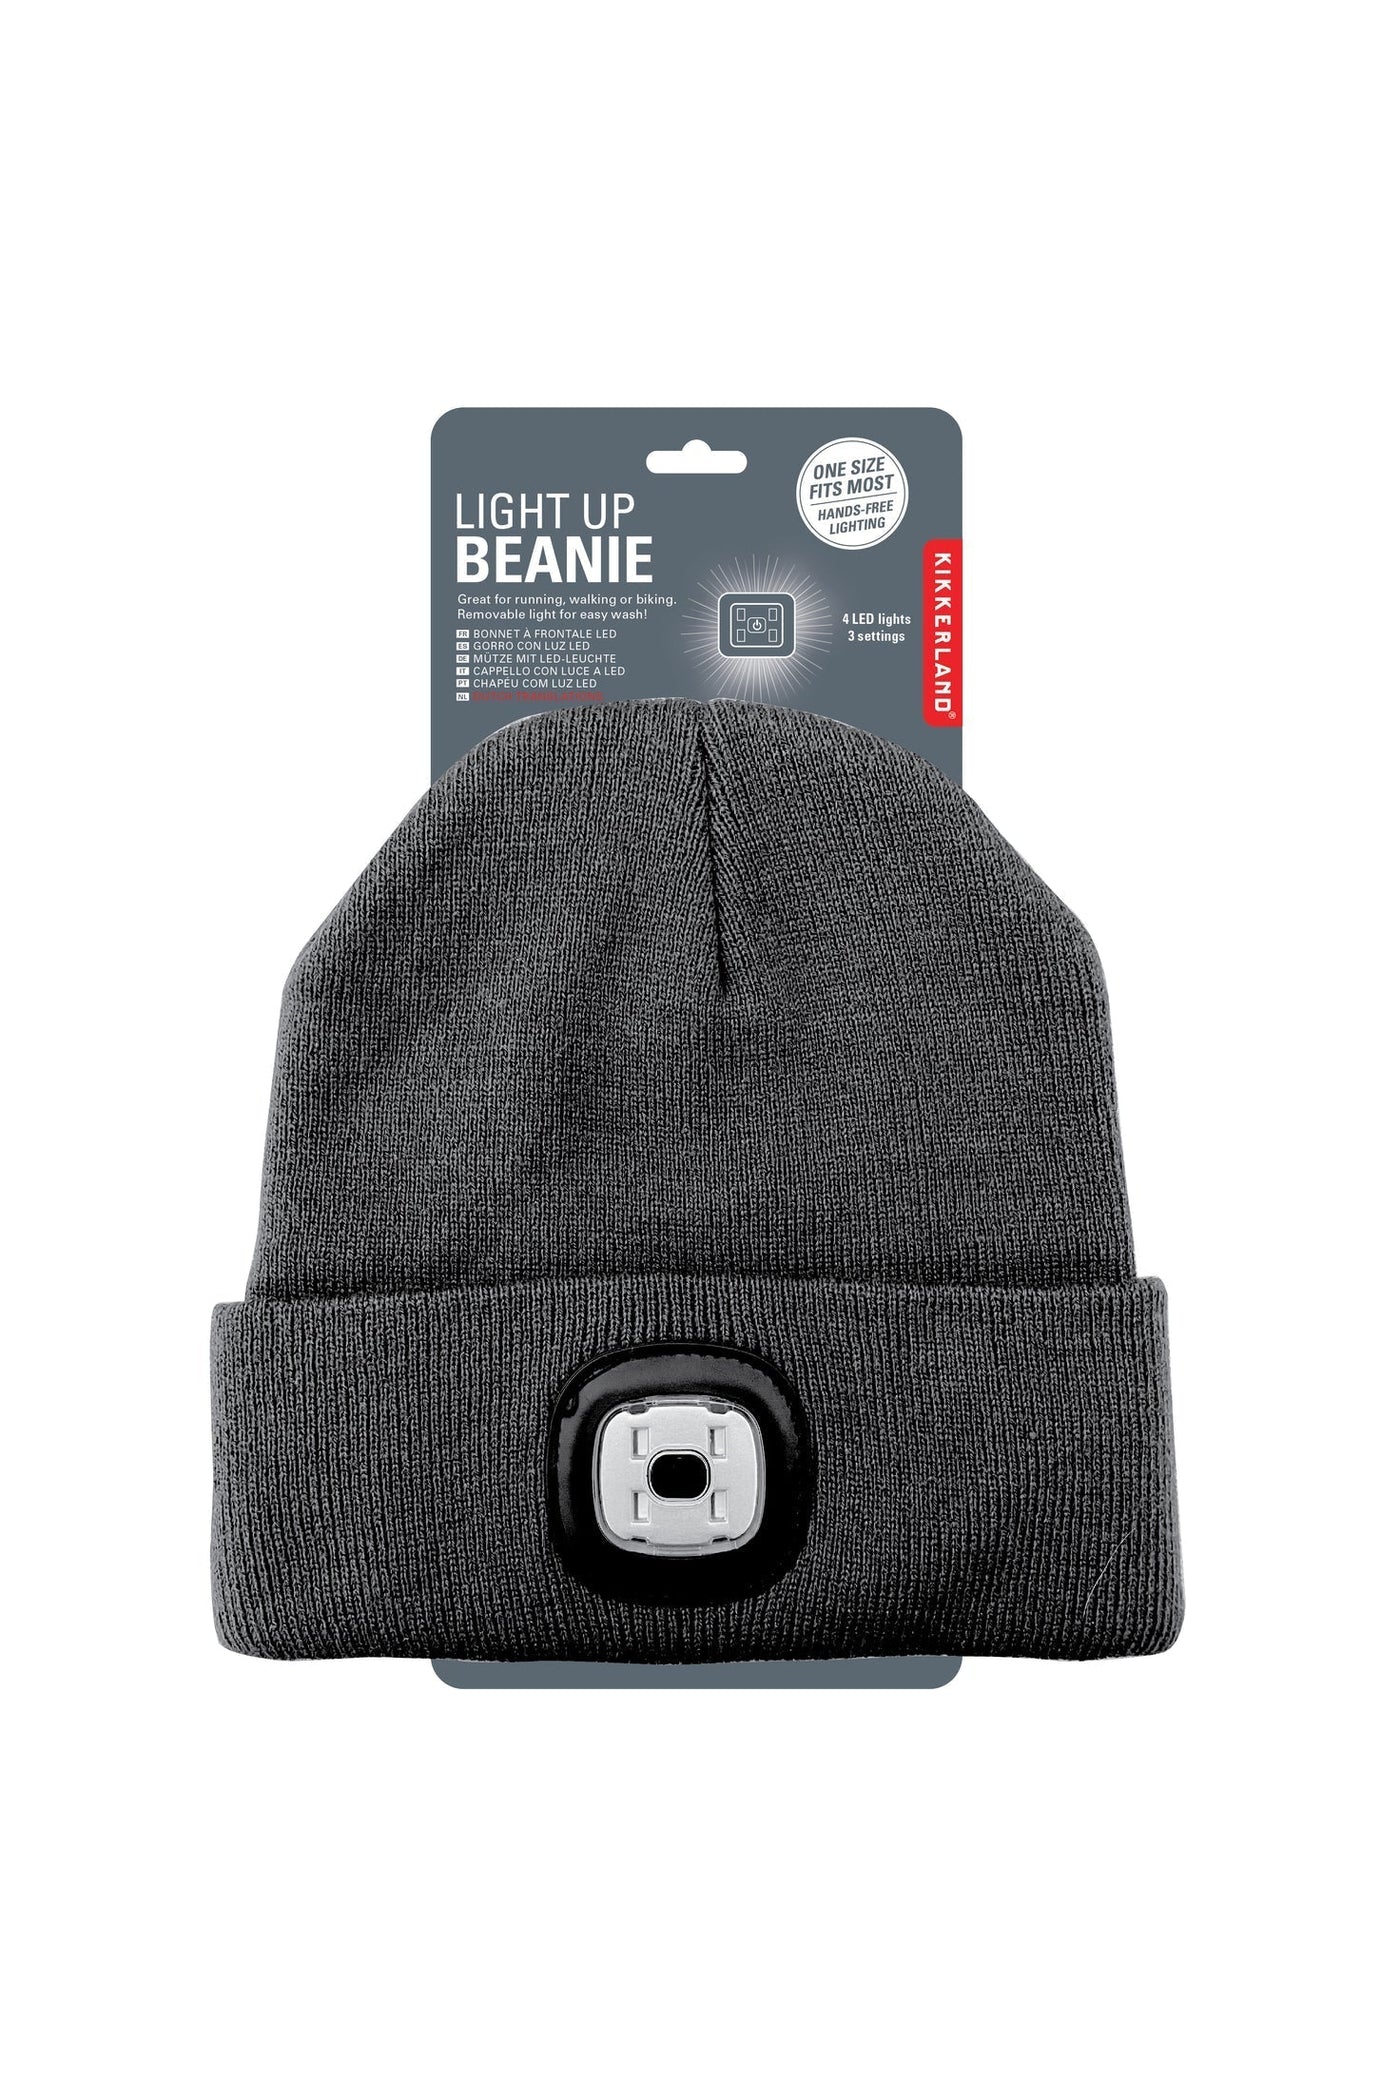 Kikkerland Grey Light Up Beanie-Mens-Ohh! By Gum - Shop Sustainable